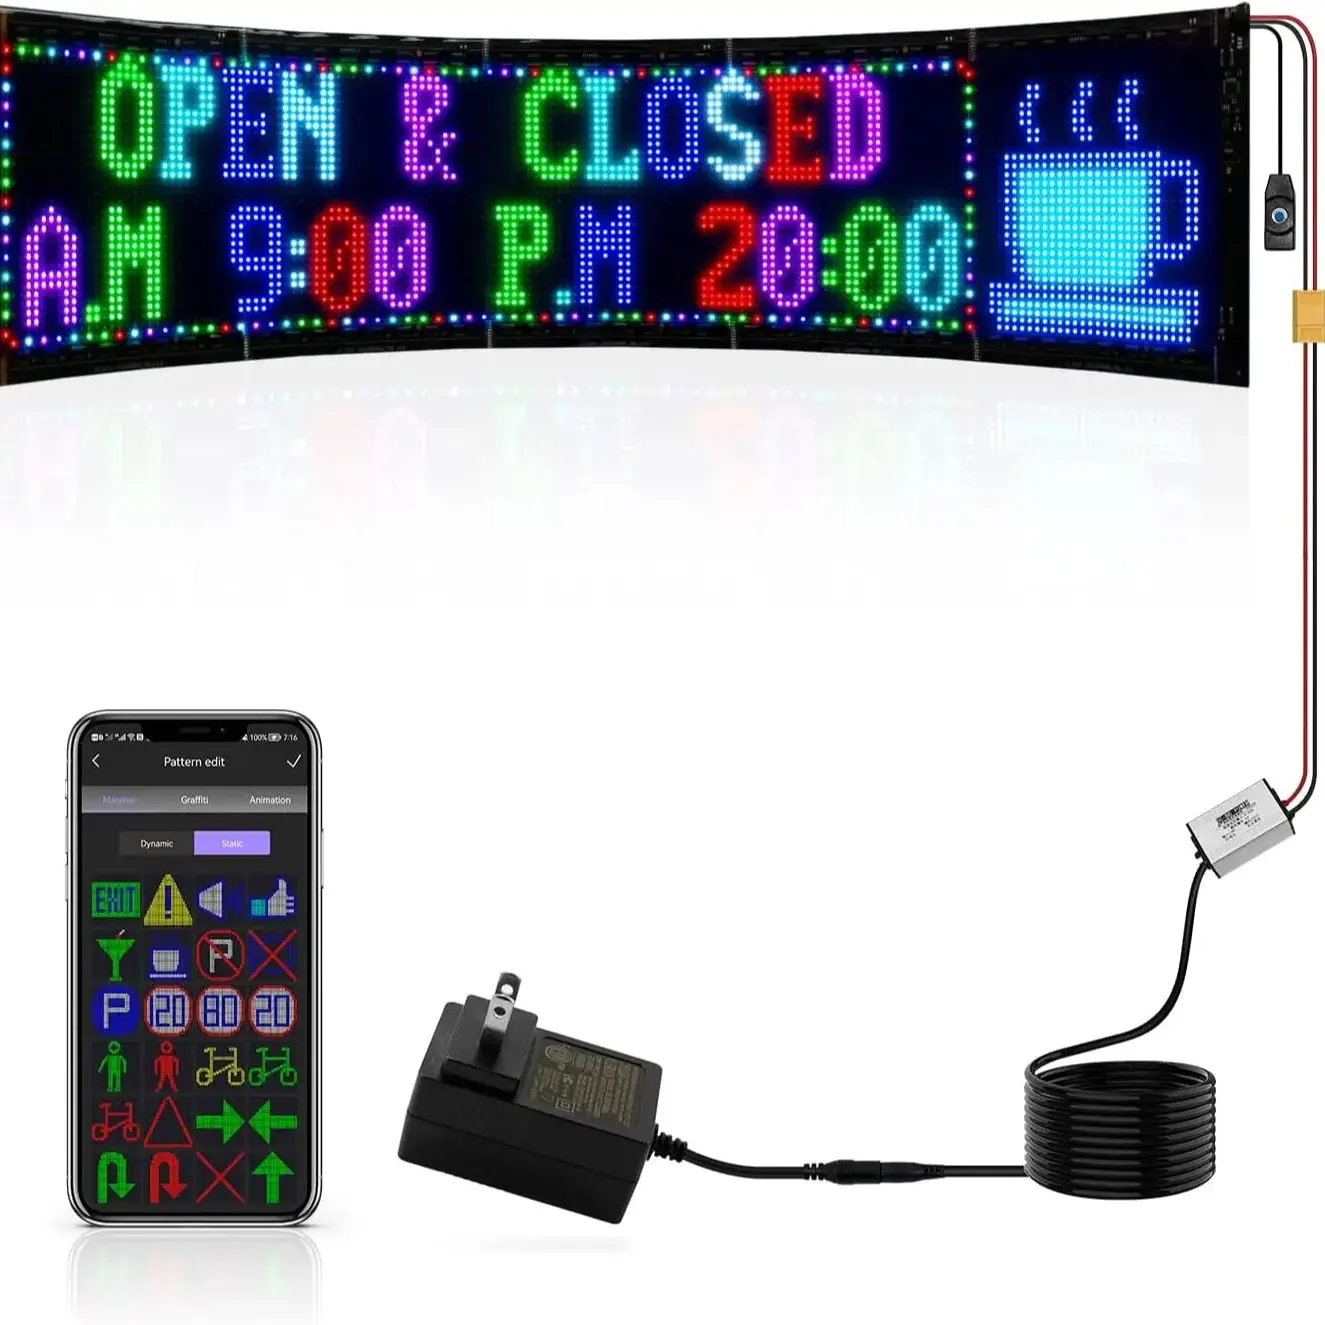 GOTUS LED flexible rolling advertising sign, controlled by Bluetooth APP, supports dual single row text pattern programming